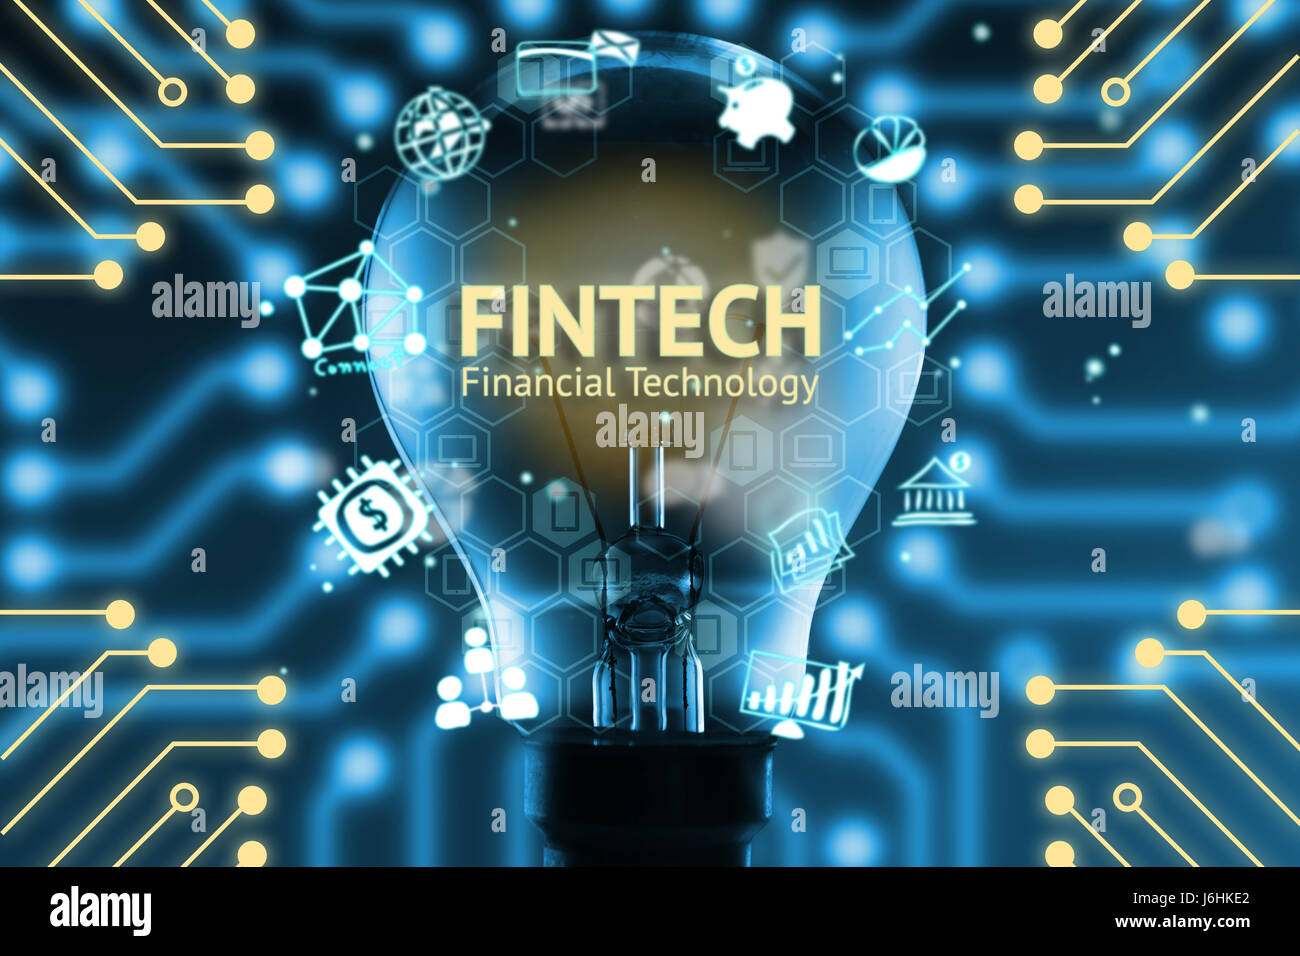 Fintech concept . Icons of financial technology and bank . Light bulb , Infographic , texts and icons. Electric circuits graphic with blue background Stock Photo